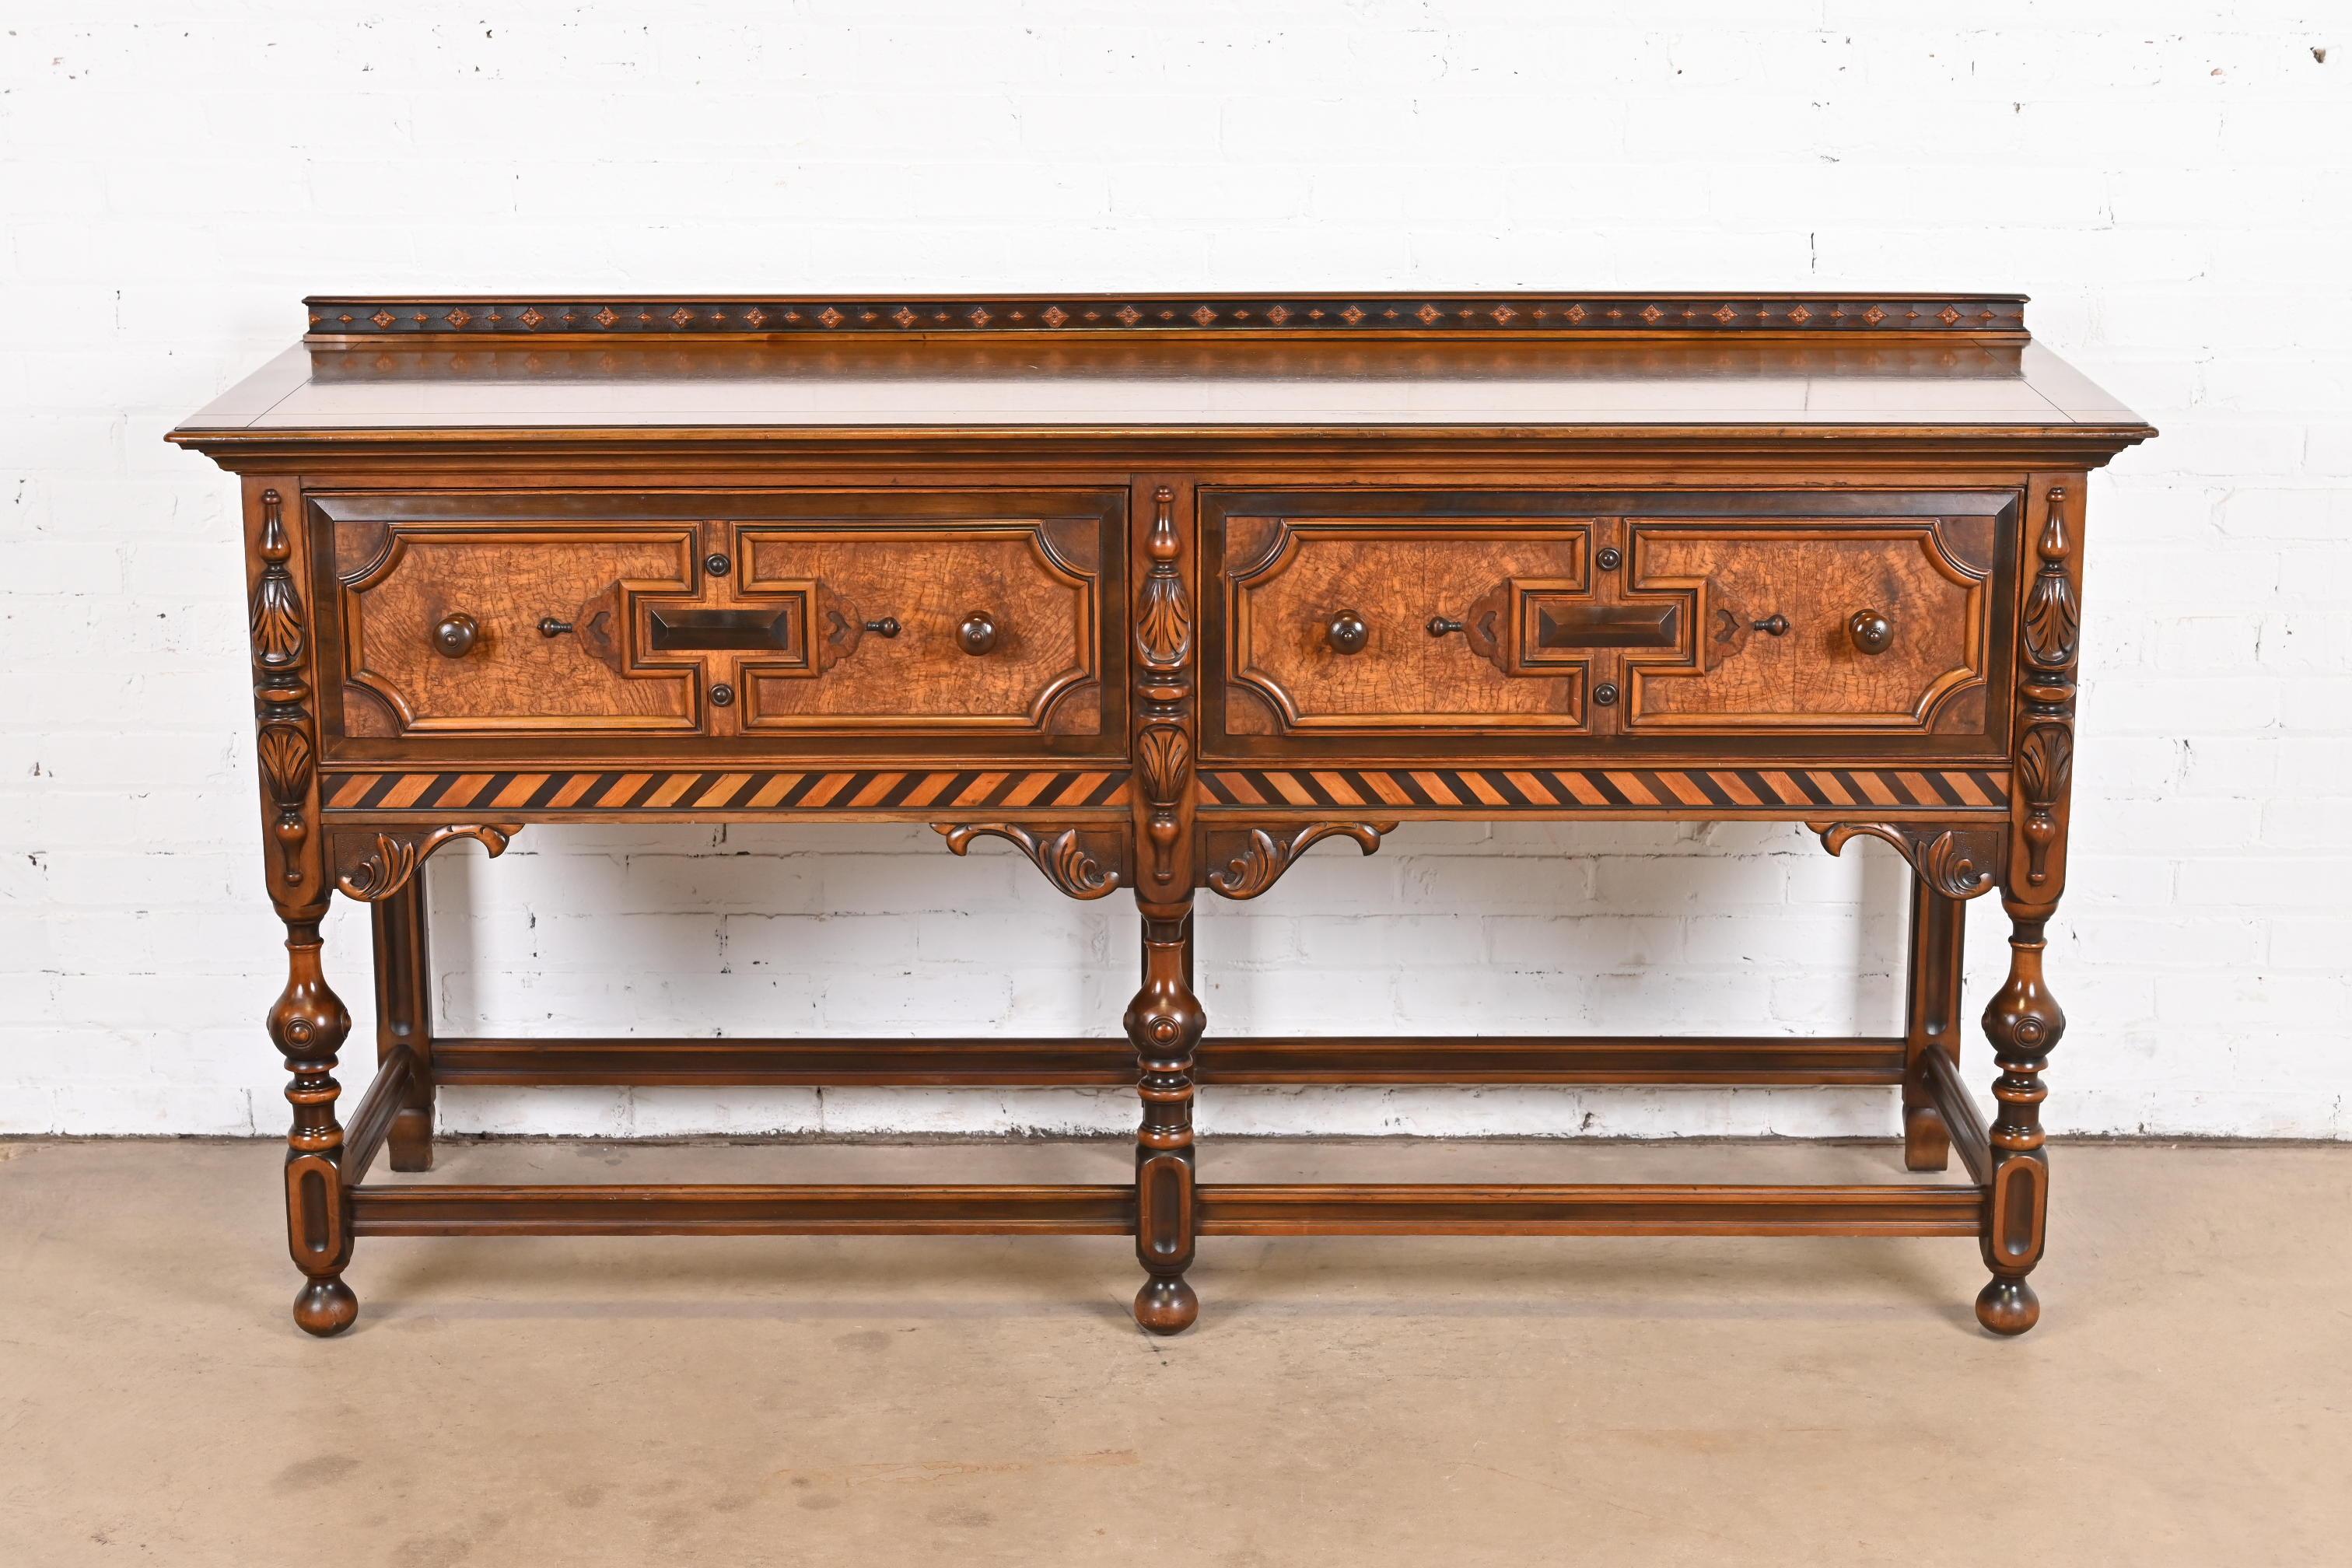 An exceptional English Jacobean style sideboard buffet or credenza

By Berkey & Gay

USA, Circa 1920s

Ornate carved walnut, with inlaid burl wood drawer fronts.

Measures: 72